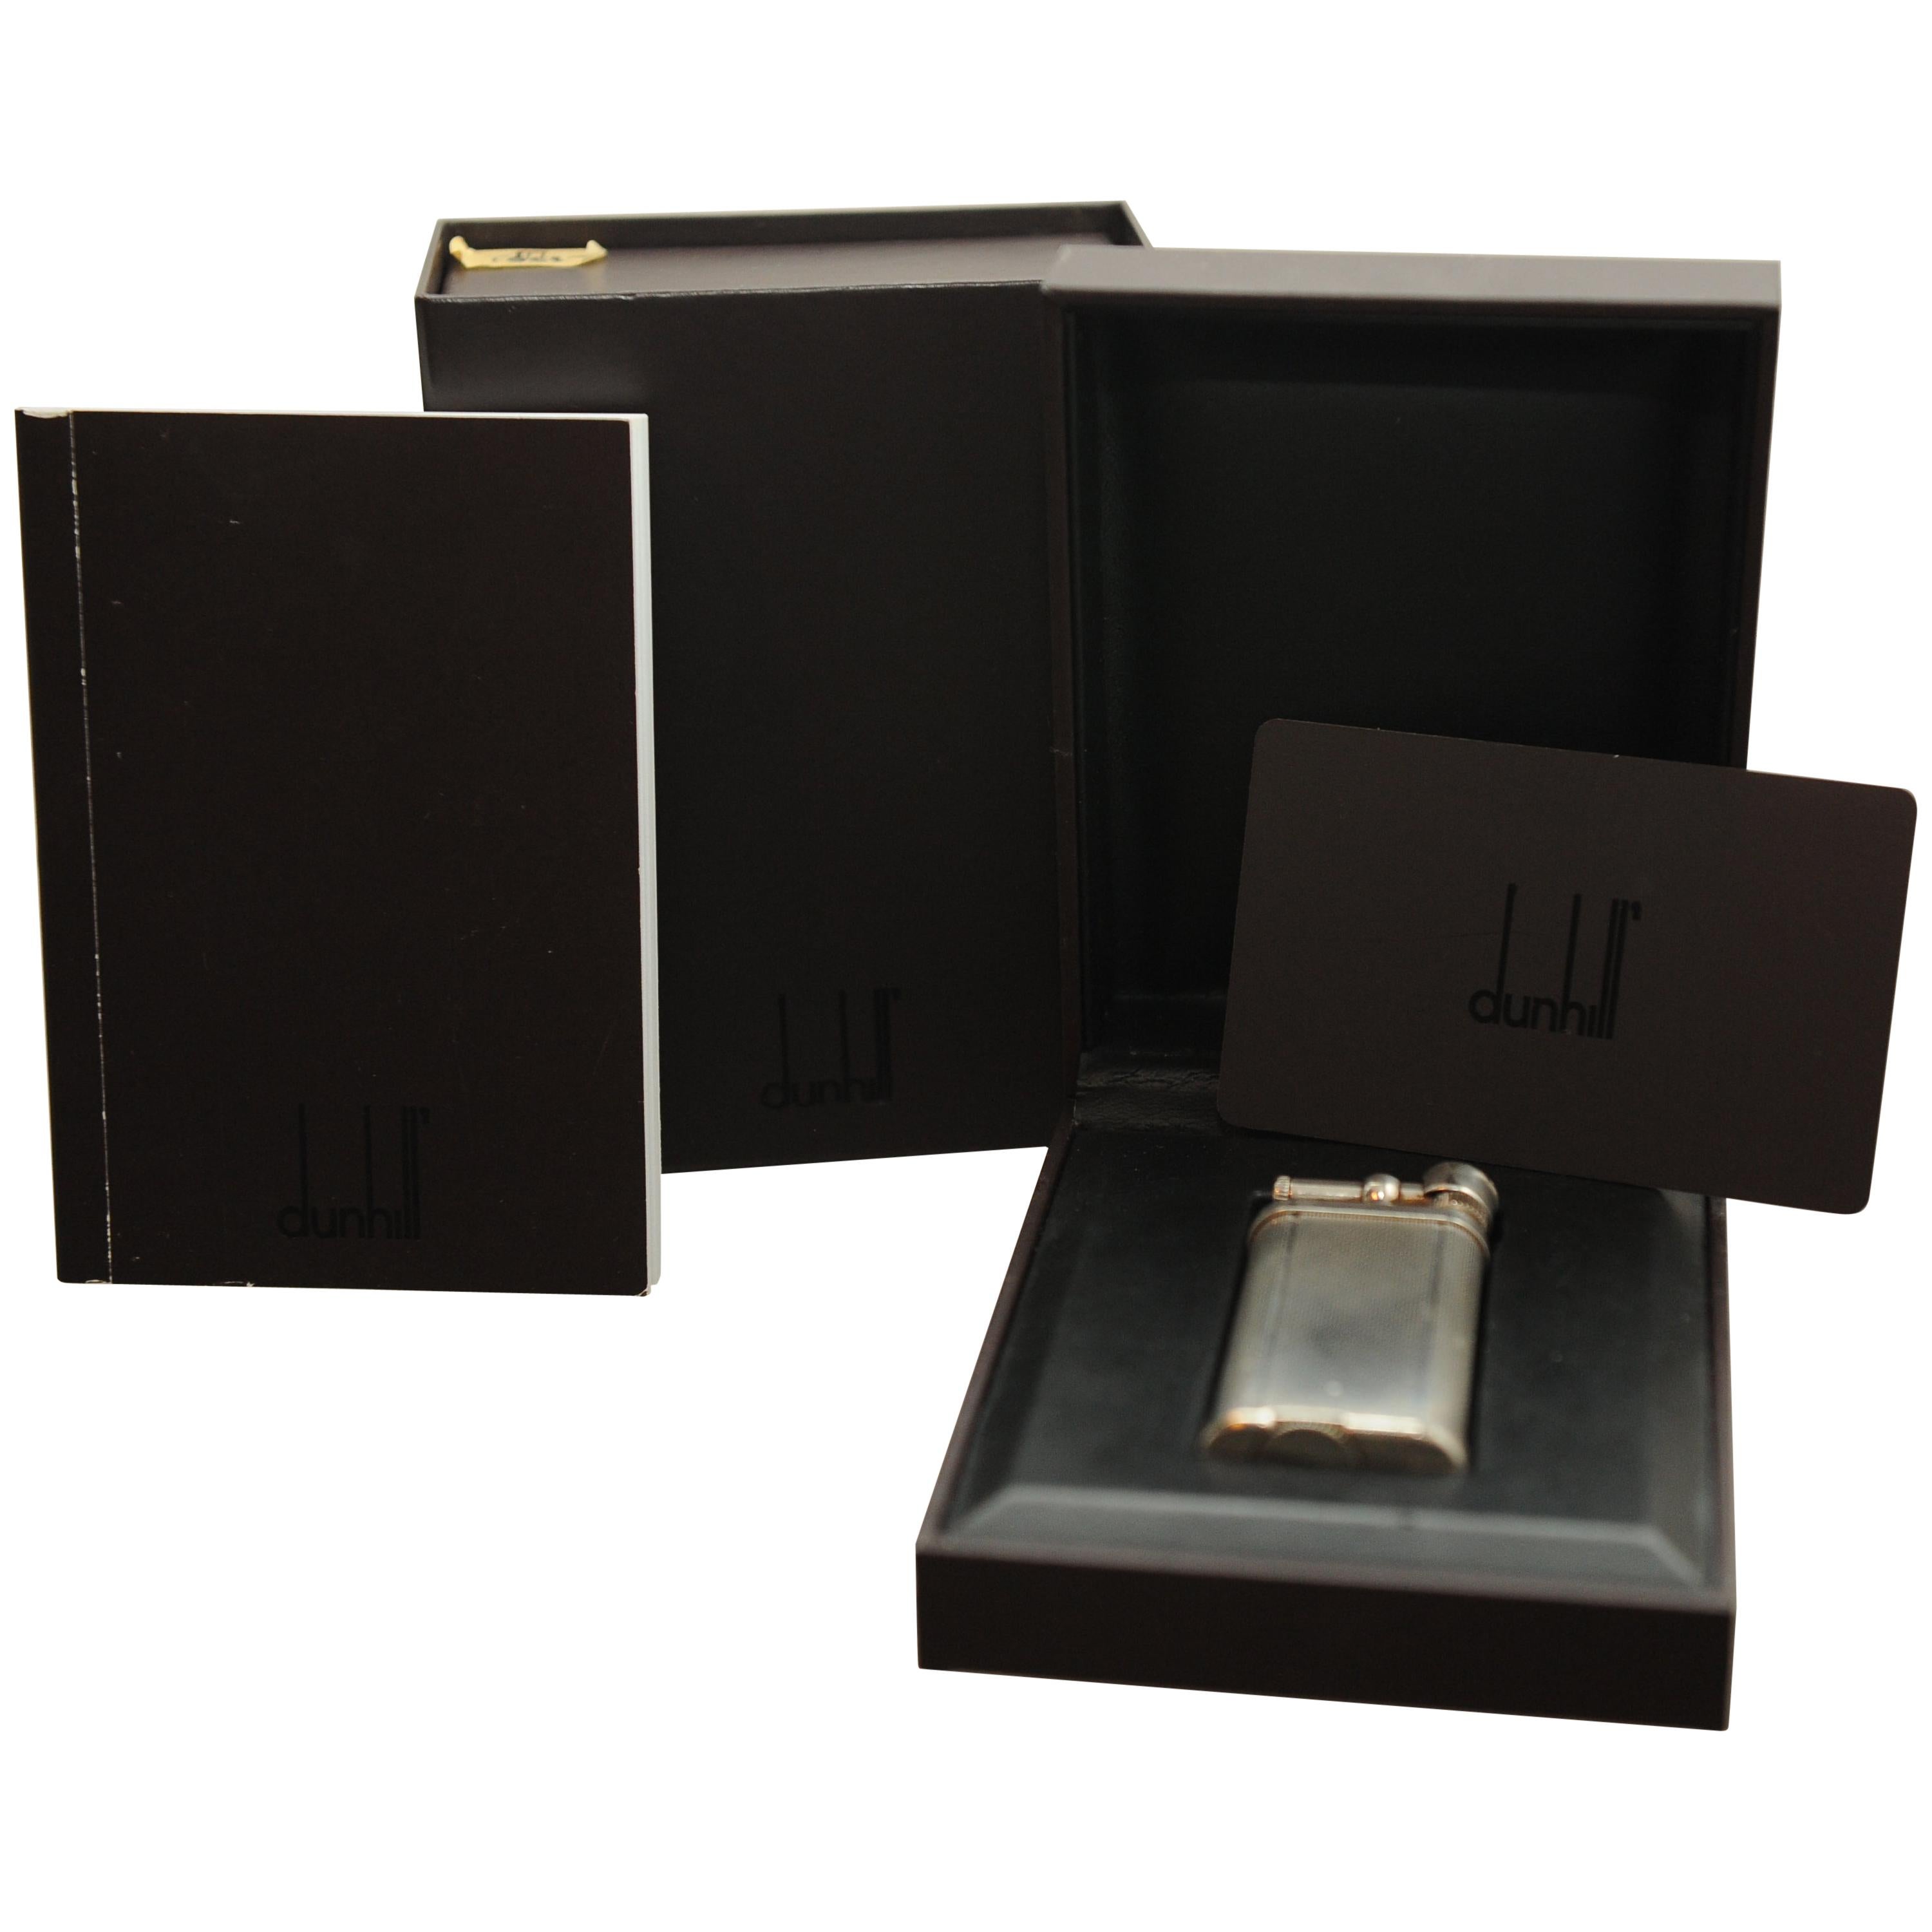 Dunhill Unique Silver Plated Gas Lighter with Original Gift Box, Papers & Flints For Sale